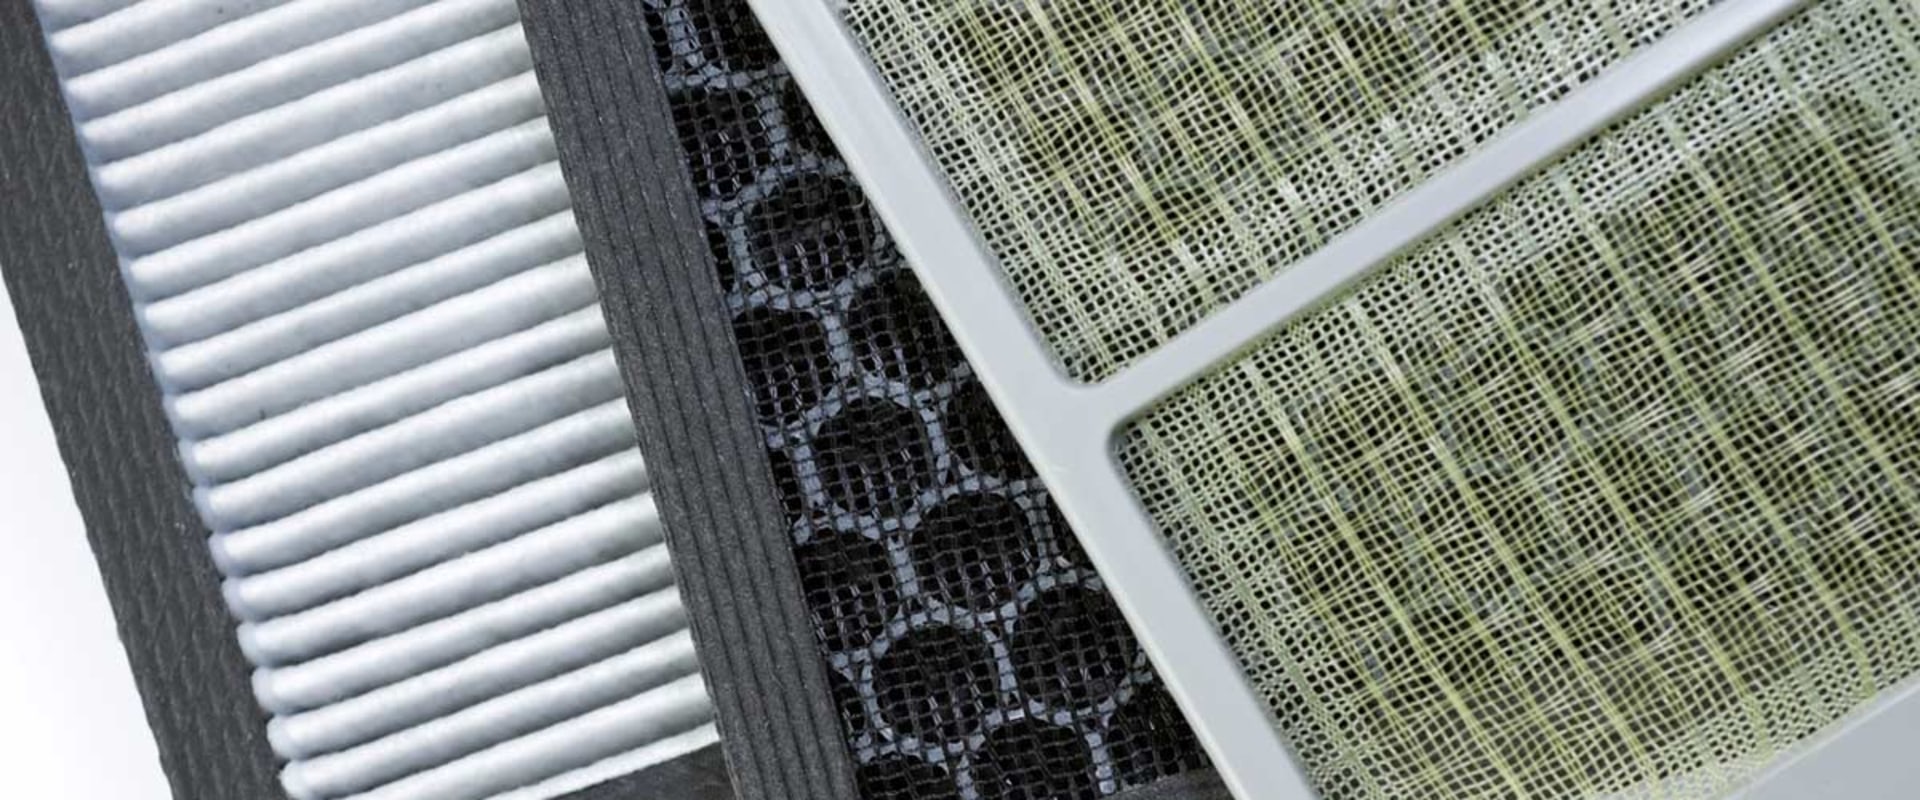 Are Electrostatic Filters Better than HEPA Filters? A Comprehensive Guide